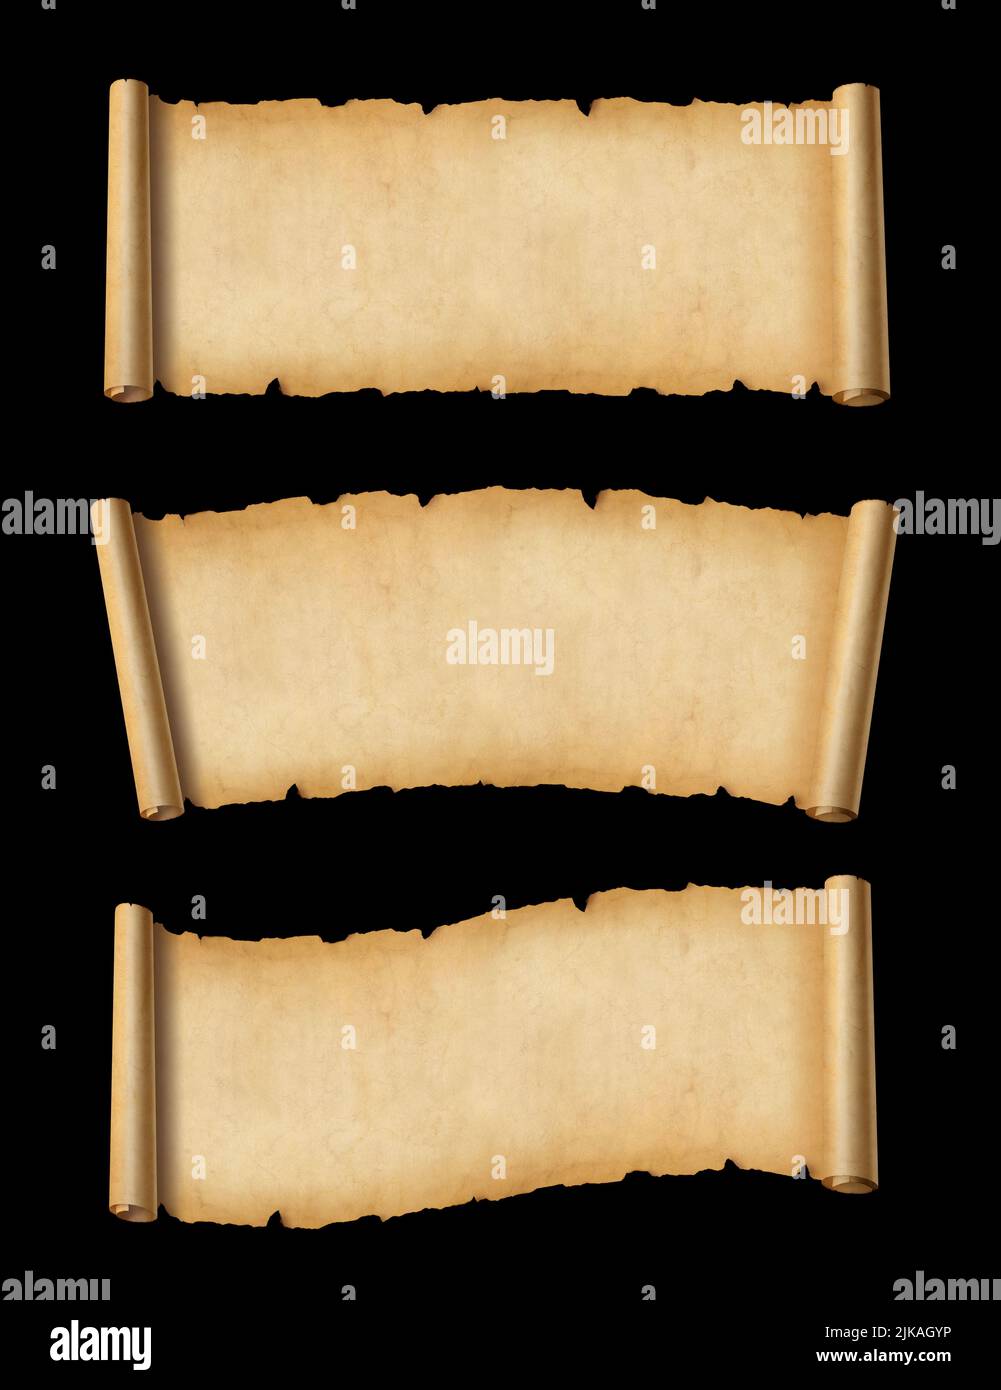 Old Parchment paper scroll isolated on black. Horizontal banners set Stock Photo